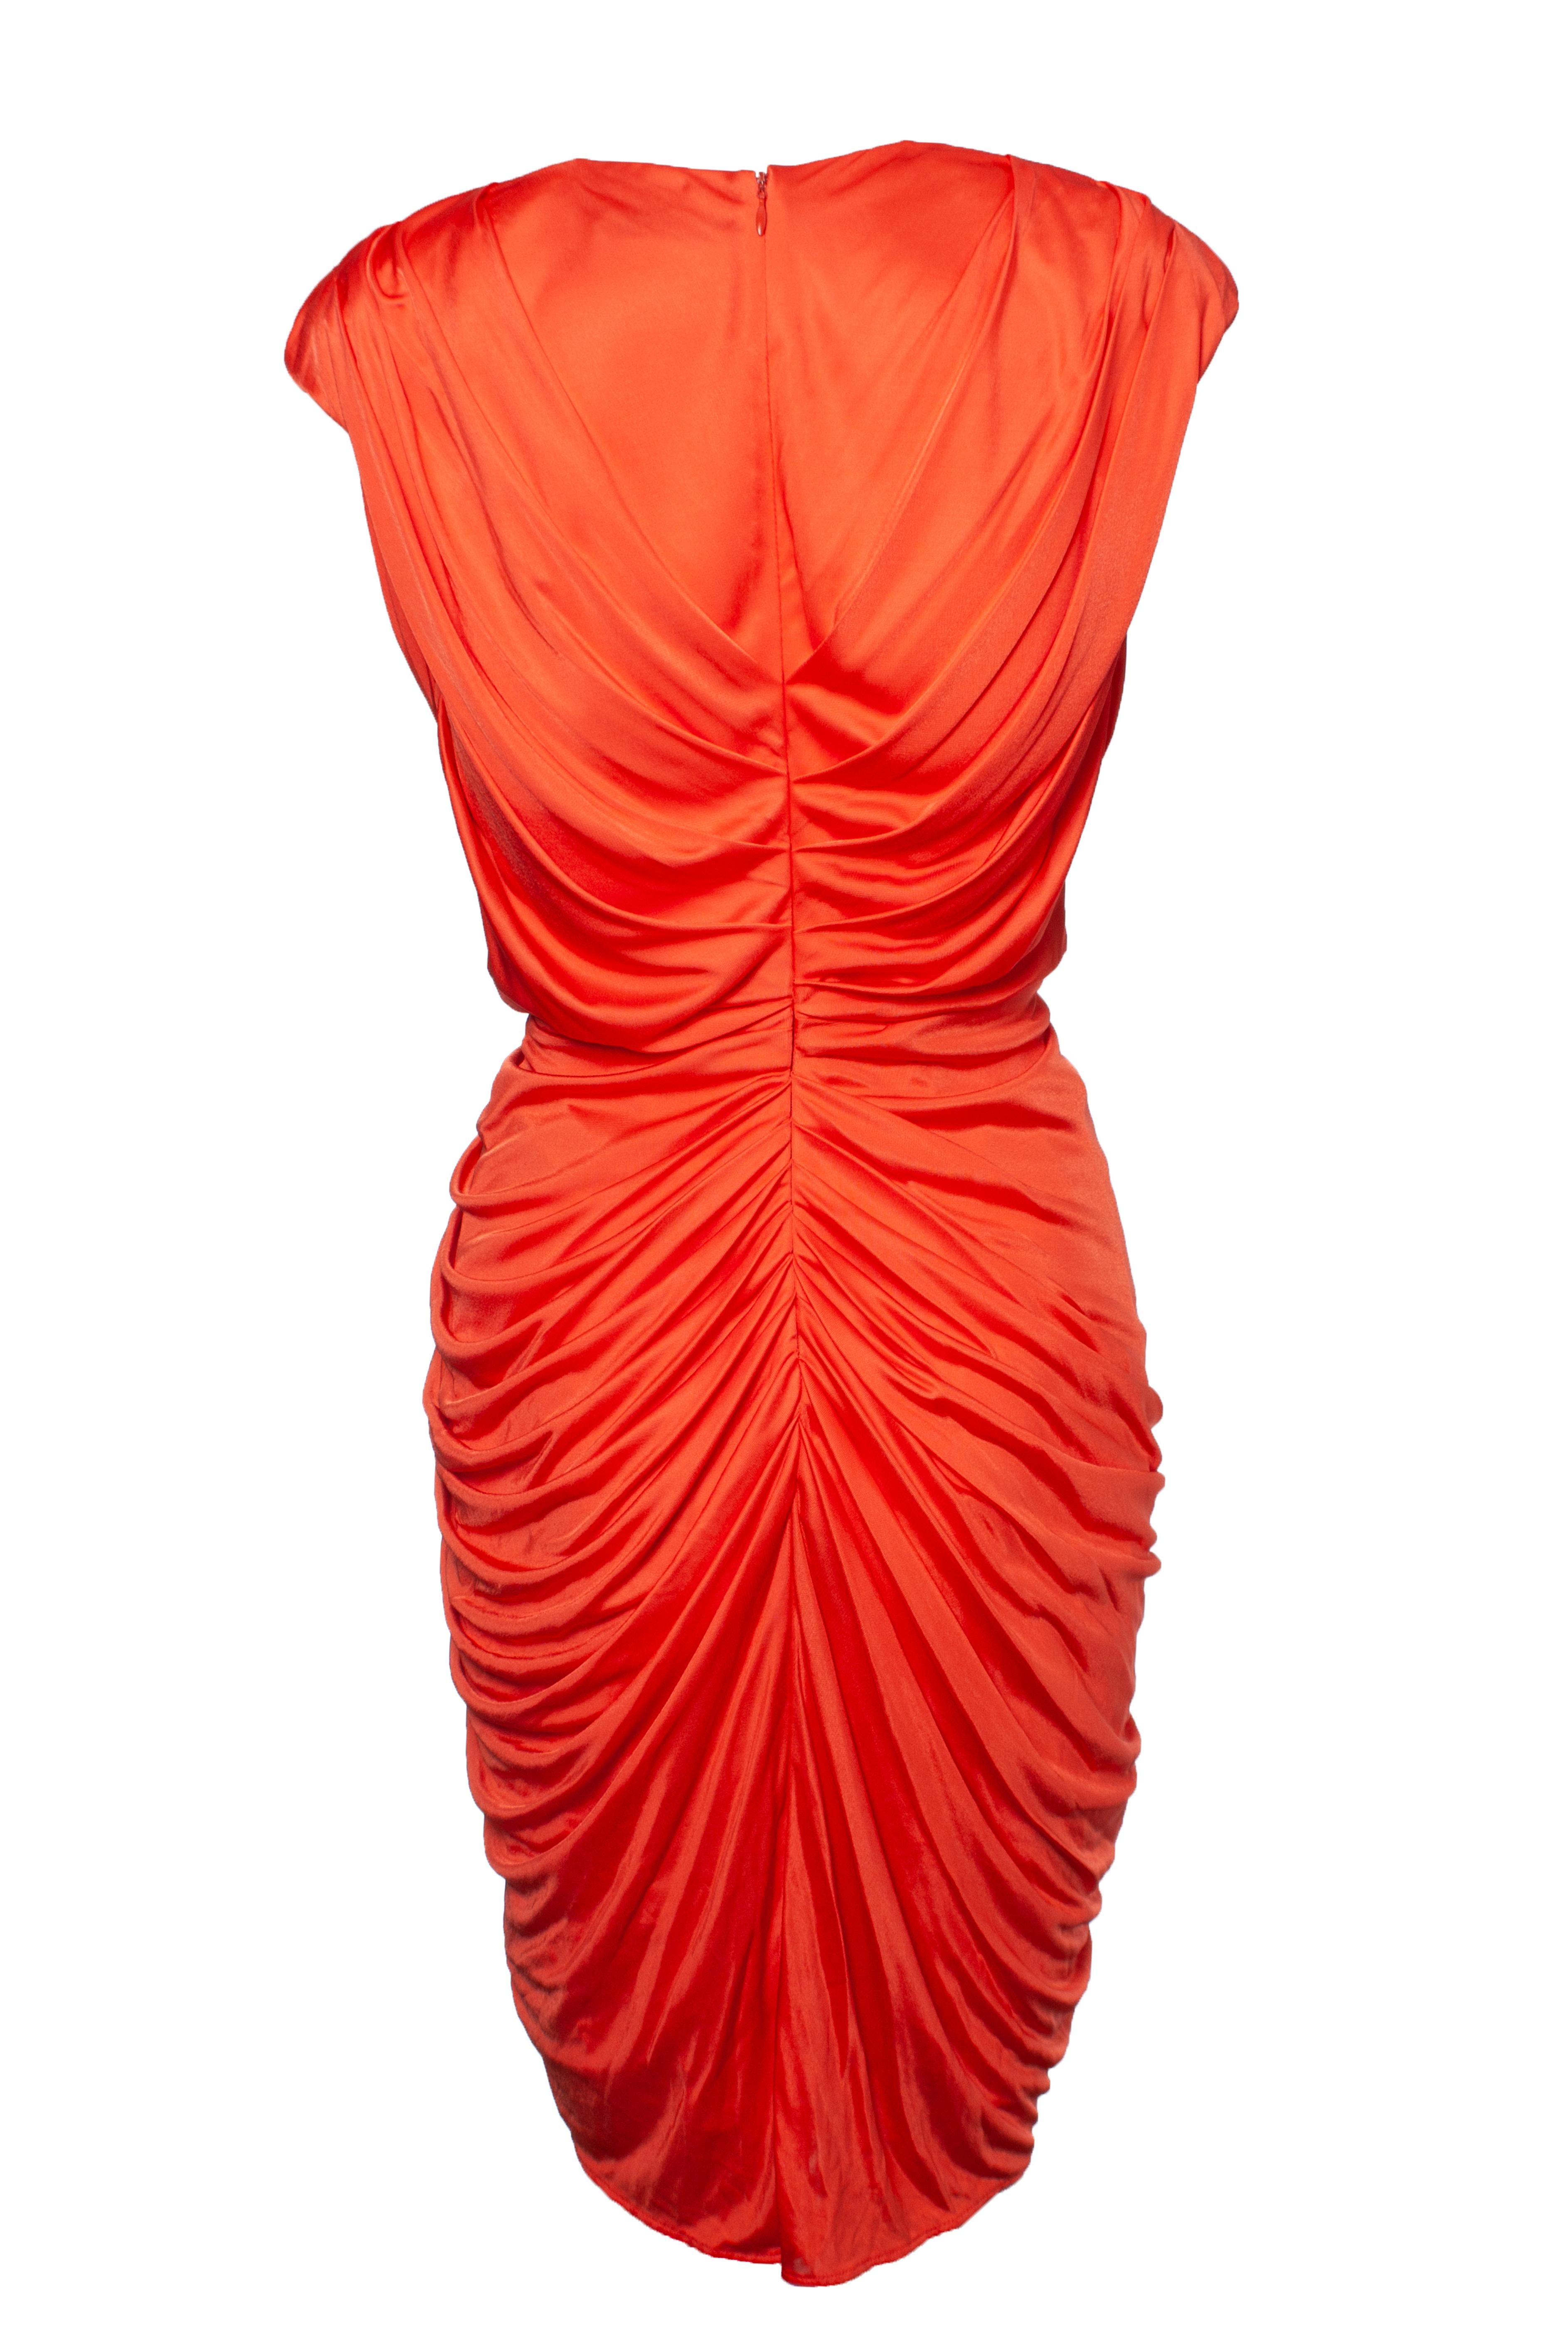 Blumarine, Orange draped dress with crystal embellishments. The item is in very good condition. Dress has shoulderpads.

• CONDITION: very good condition 

• SIZE: IT44 - M 

• MEASUREMENTS: length 97 cm, width 41 cm, waist 34 cm

• MATERIAL: 100%